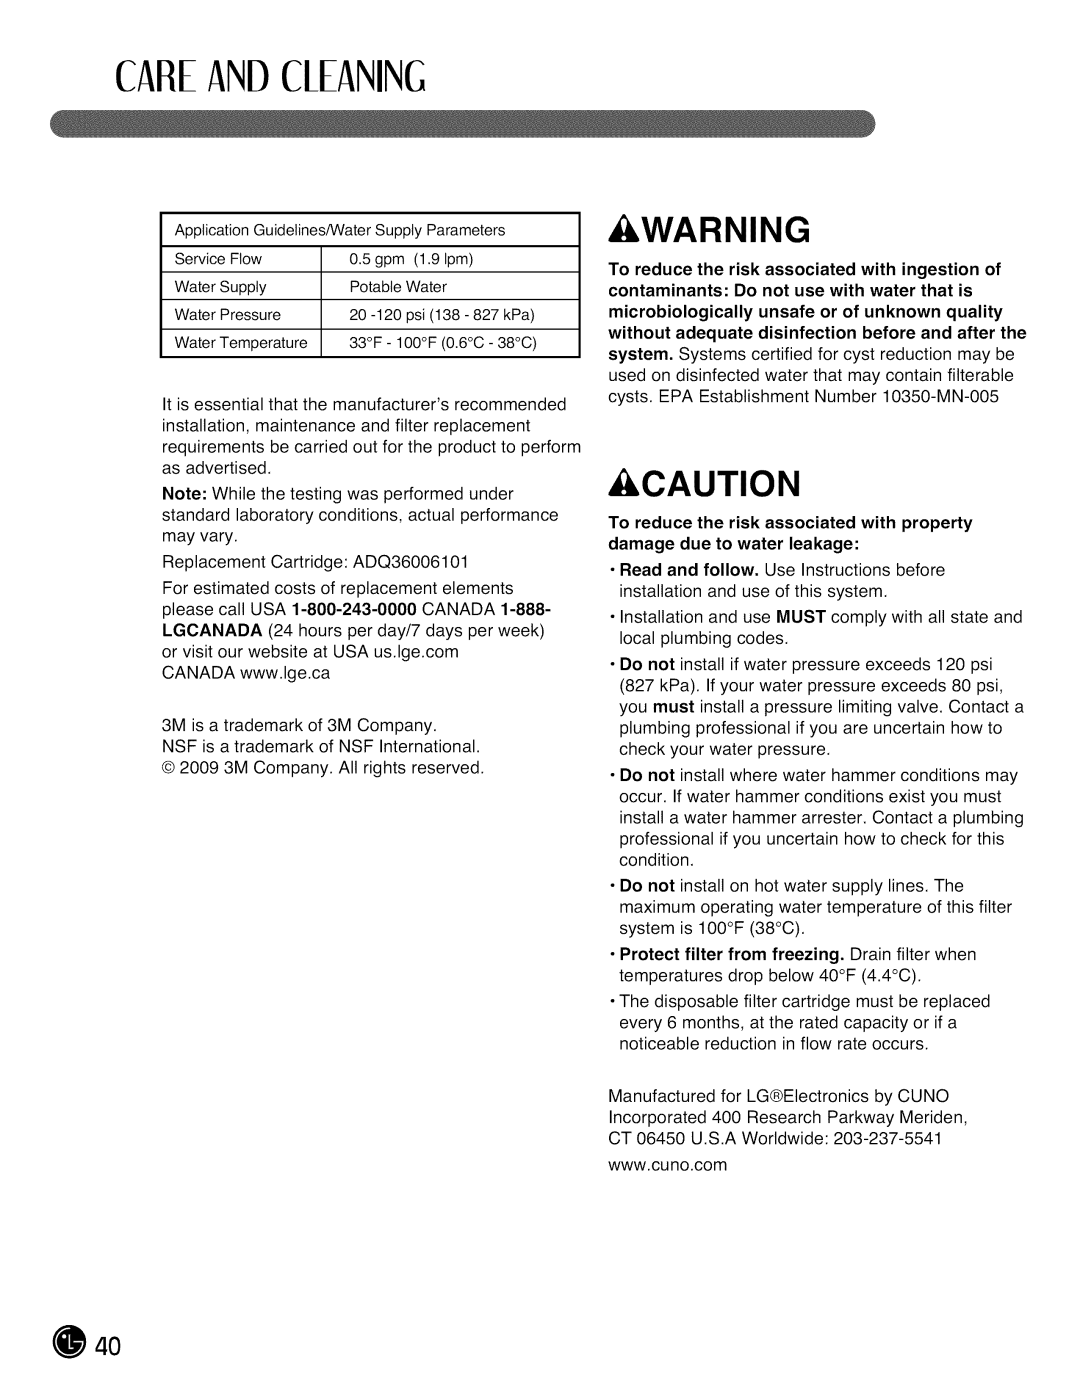 LG Electronics LMX28988 manual Careandcleaning, Warning, Caution 